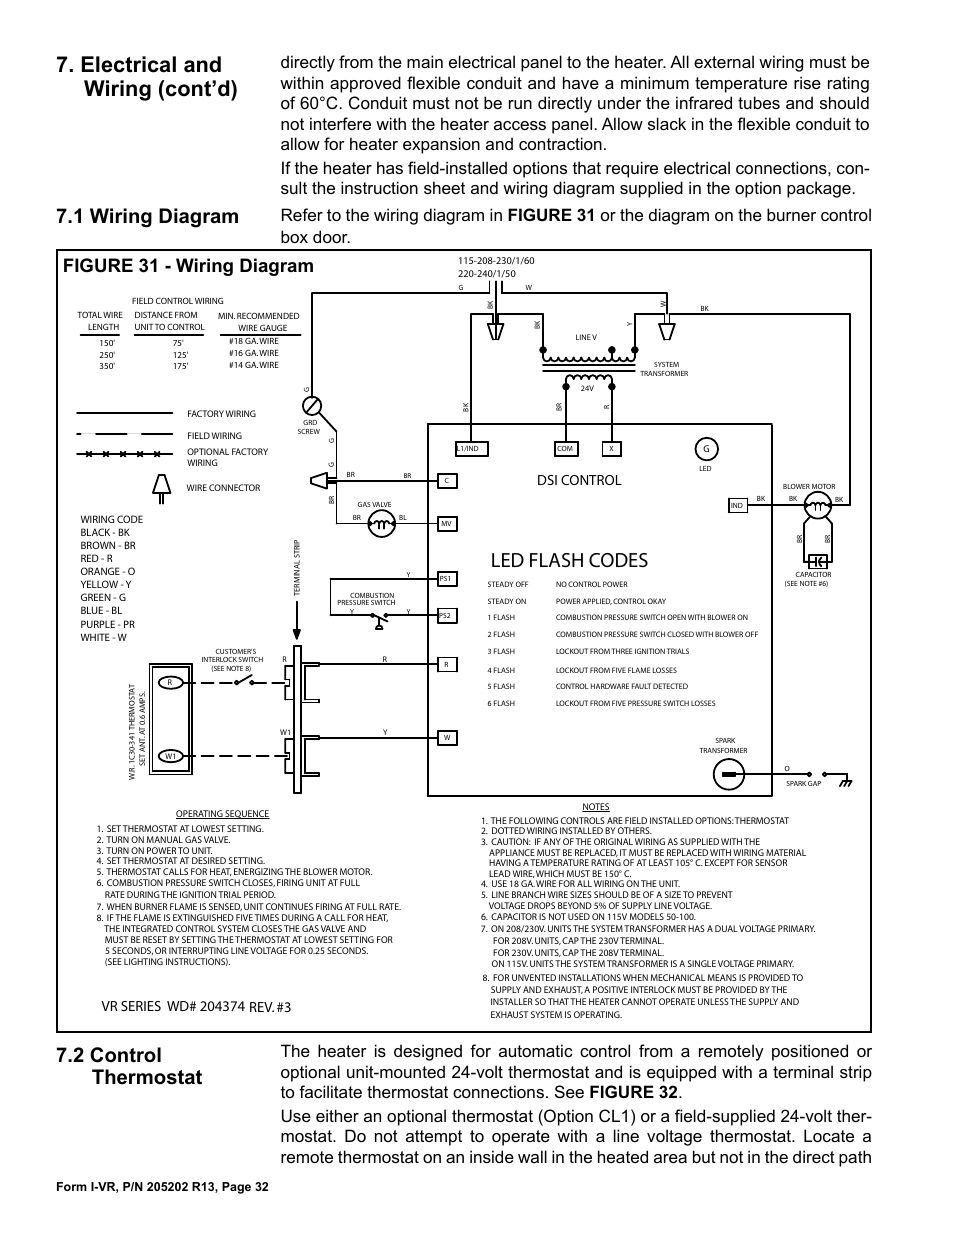 1 wiring diagram 7.2 control thermostat, Electrical and wiring (cont'd), 2  control thermostat | Reznor VR Unit Installation Manual User Manual | Page  33 / 49  Wiring Diagram Override Thermostat Reznor Ag3    Manuals Directory